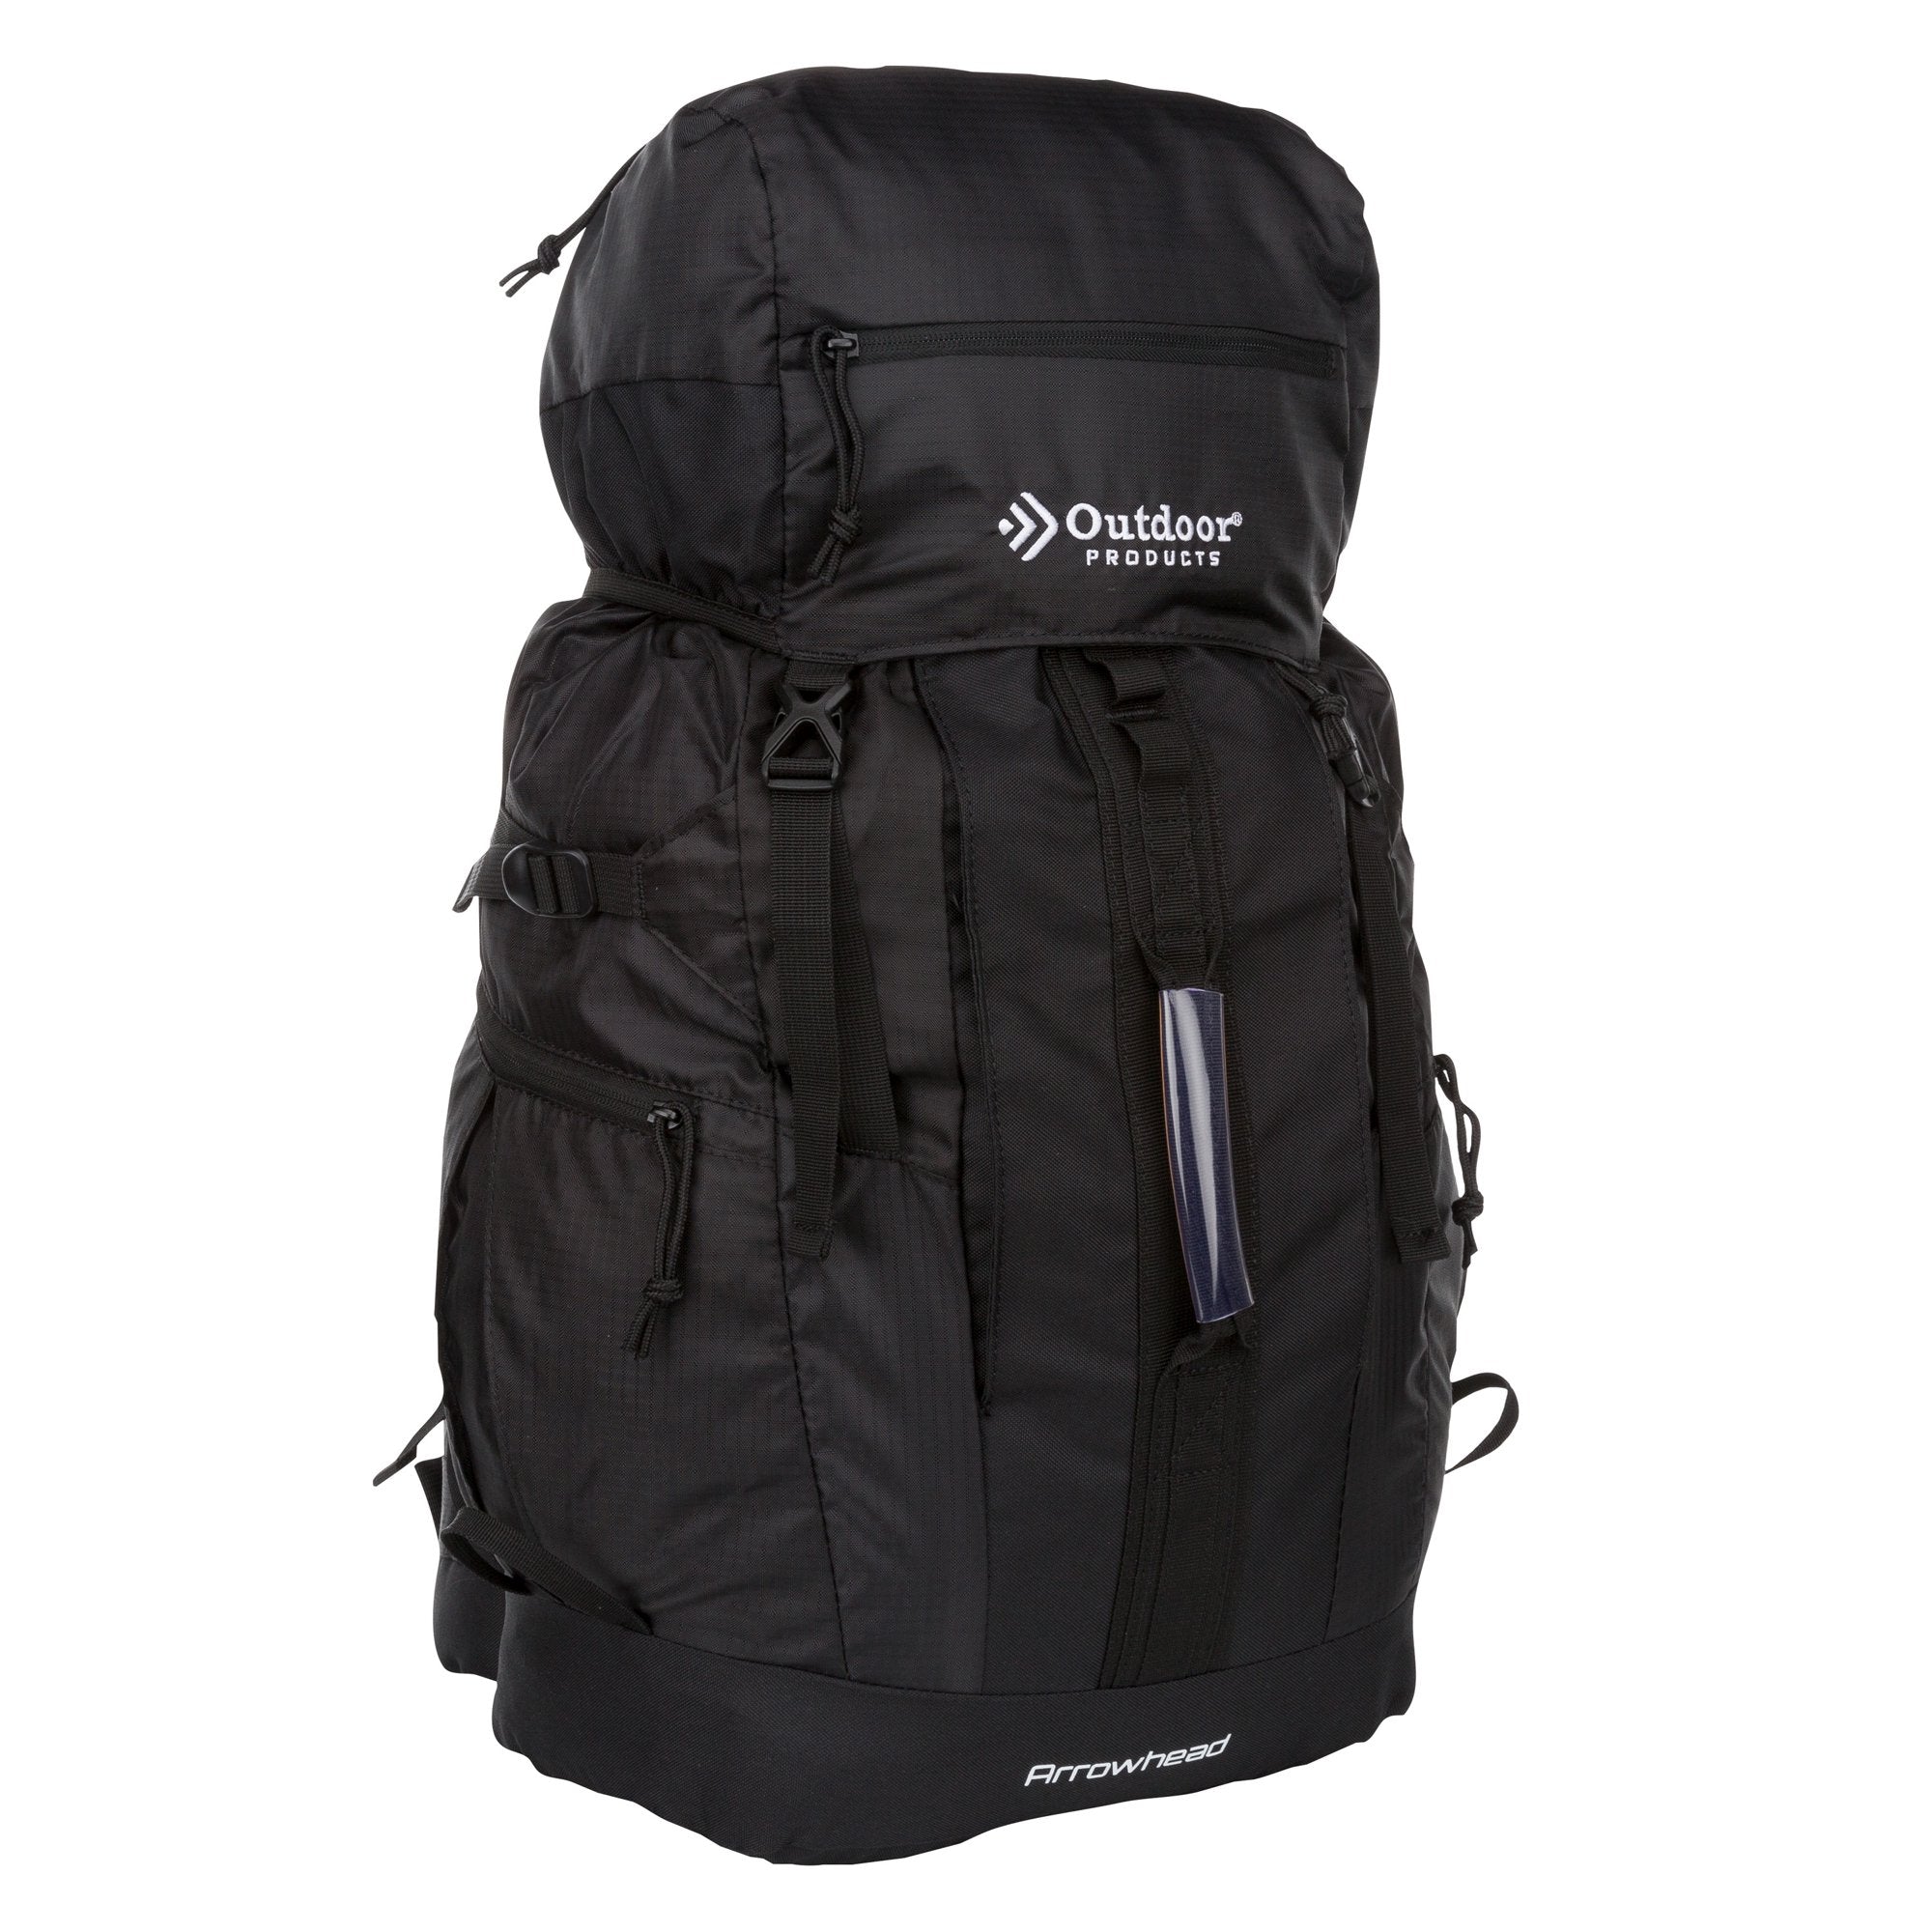 Outdoor Products Arrowhead Hiking Backpack - Bargainwizz